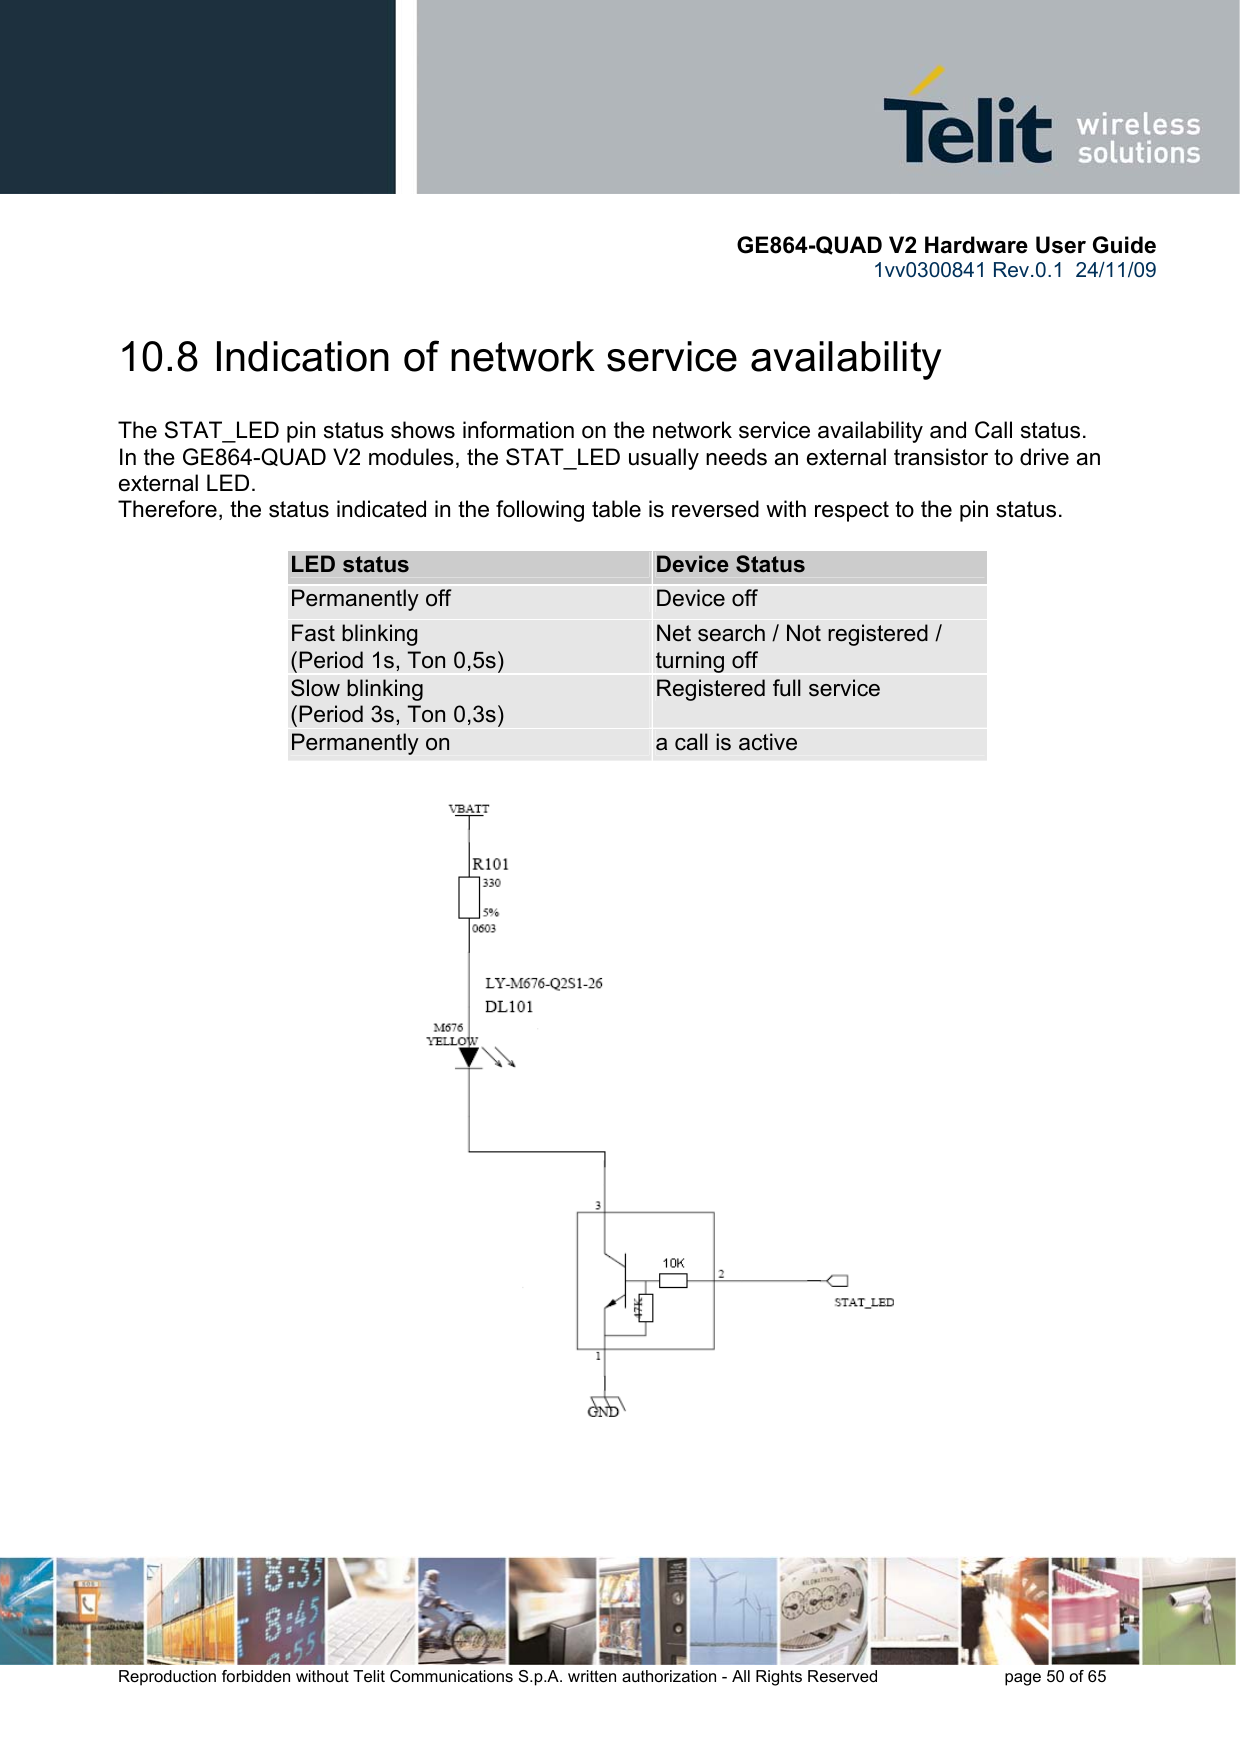       GE864-QUAD V2 Hardware User Guide 1vv0300841 Rev.0.1  24/11/09      Reproduction forbidden without Telit Communications S.p.A. written authorization - All Rights Reserved    page 50 of 65  10.8  Indication of network service availability The STAT_LED pin status shows information on the network service availability and Call status.  In the GE864-QUAD V2 modules, the STAT_LED usually needs an external transistor to drive an external LED. Therefore, the status indicated in the following table is reversed with respect to the pin status.             LED status  Device Status Permanently off  Device off Fast blinking  (Period 1s, Ton 0,5s) Net search / Not registered / turning off Slow blinking (Period 3s, Ton 0,3s) Registered full service Permanently on  a call is active        